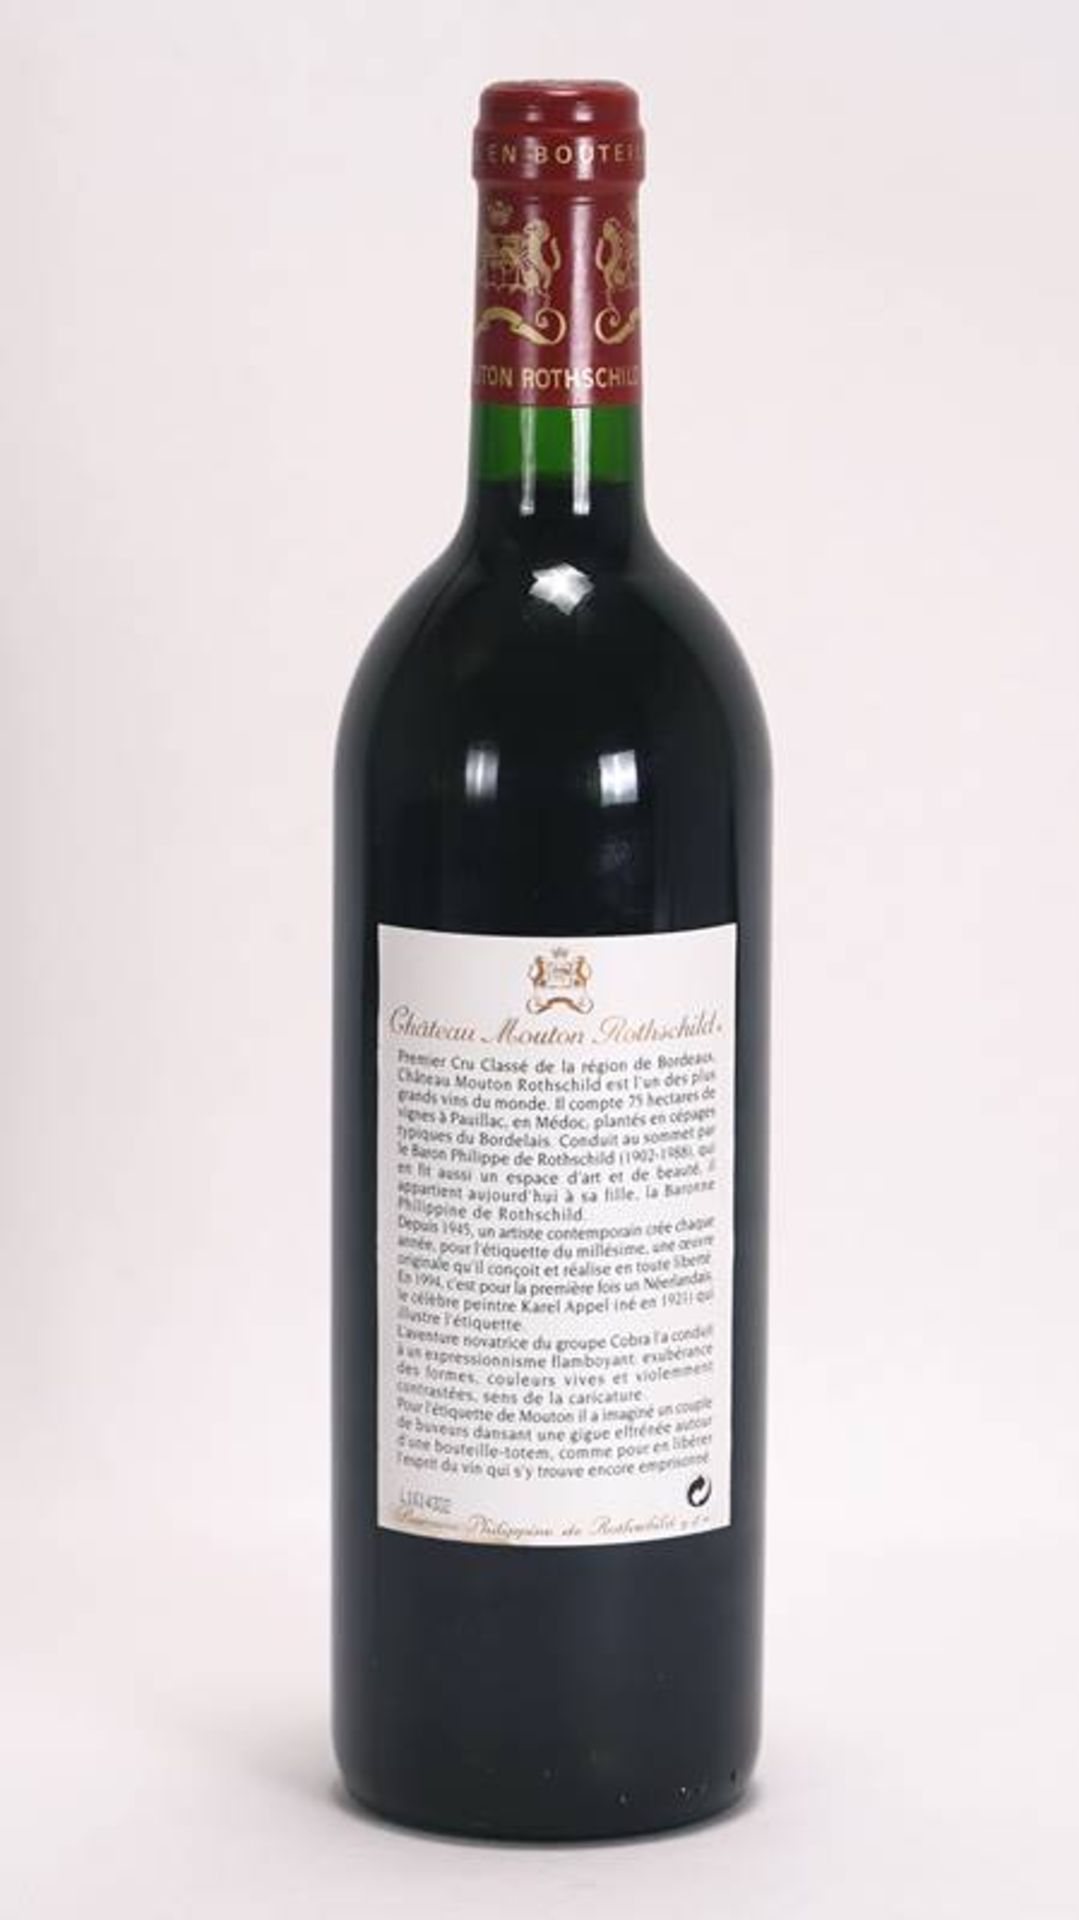 Bottle of Chateau Mouton Rothschild 1994 - Image 2 of 2